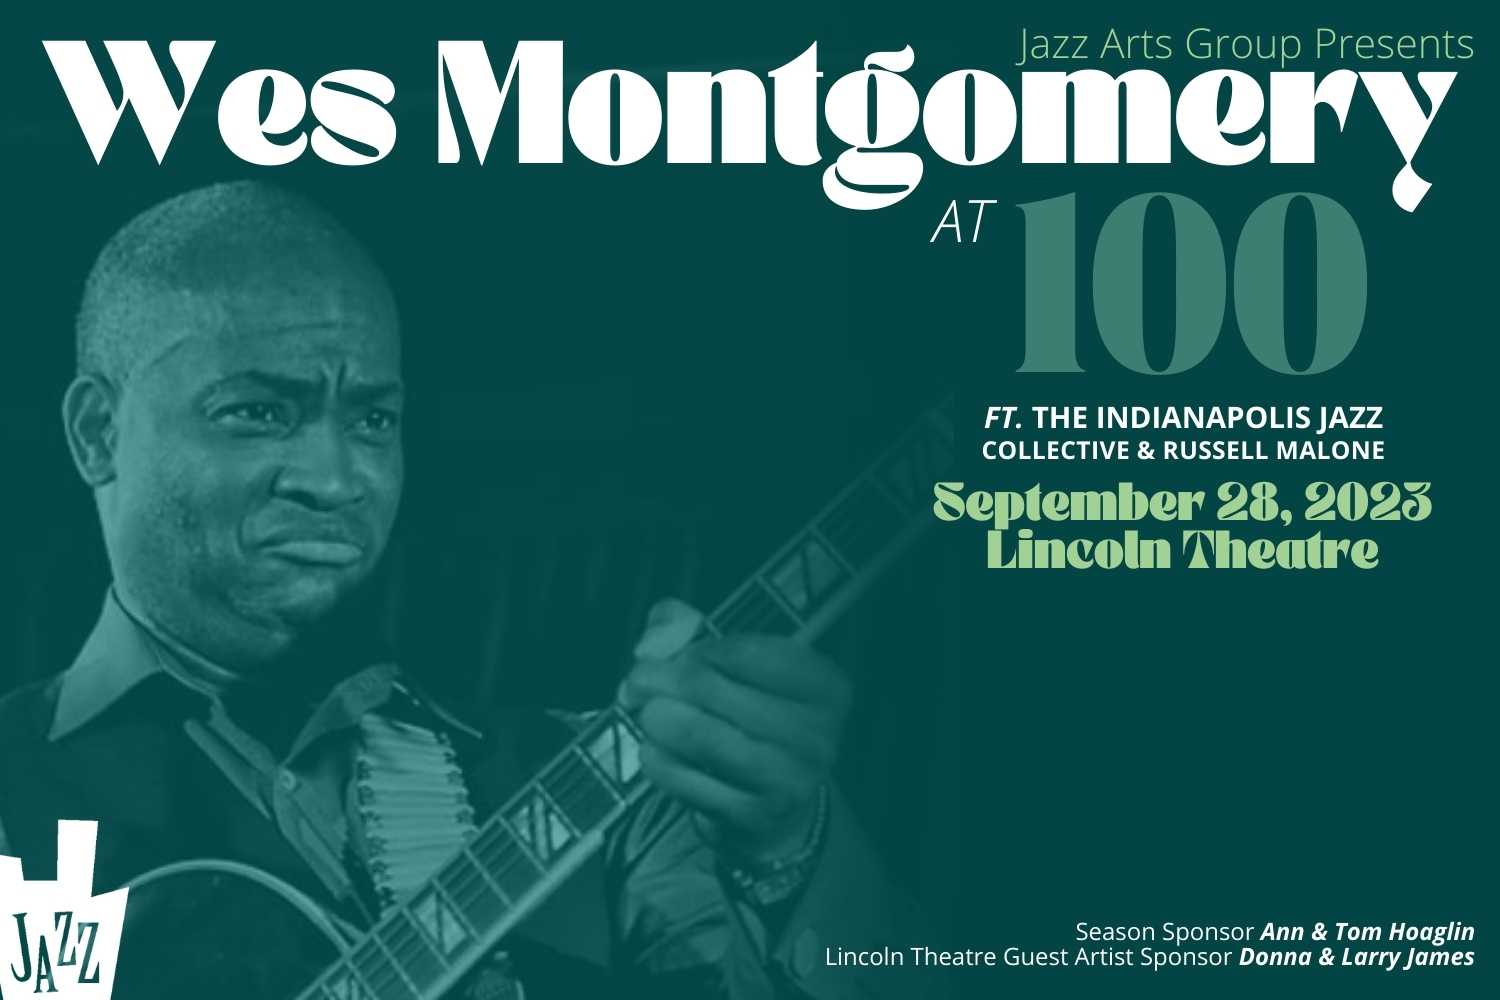 Wes Montgomery at 100 ft.